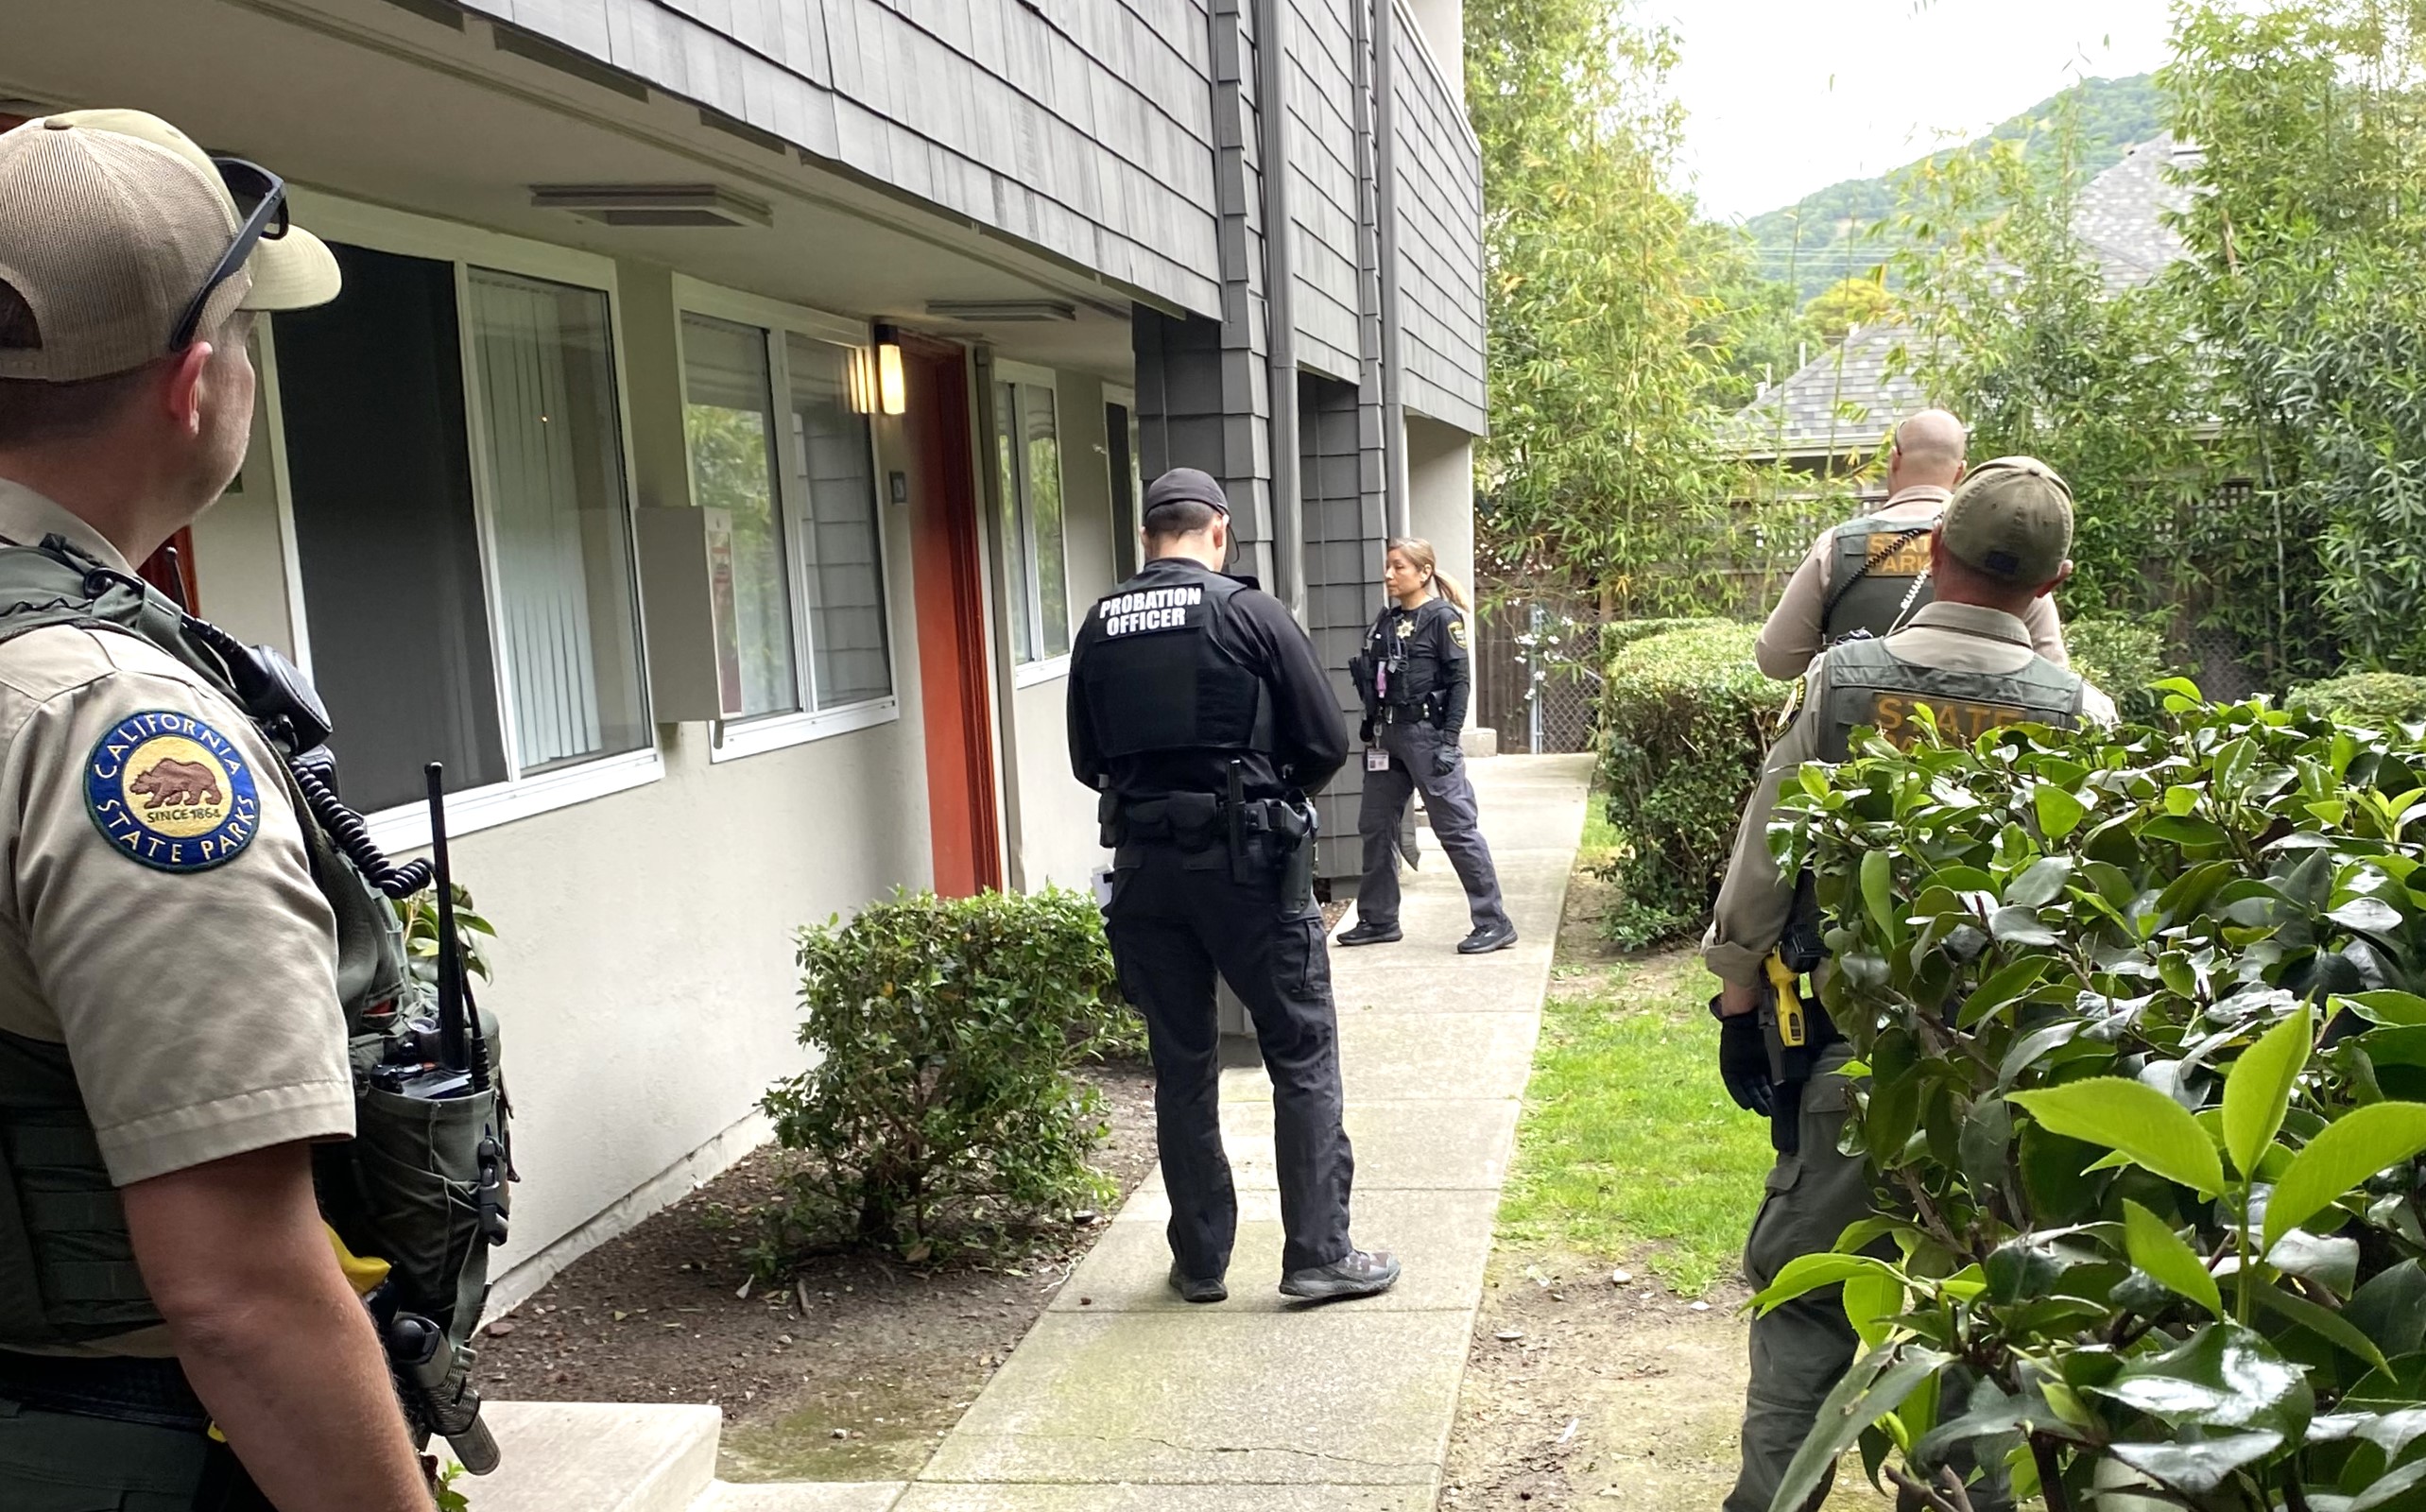 Several law enforcement officers wait outside the apartment door of a person on probation.